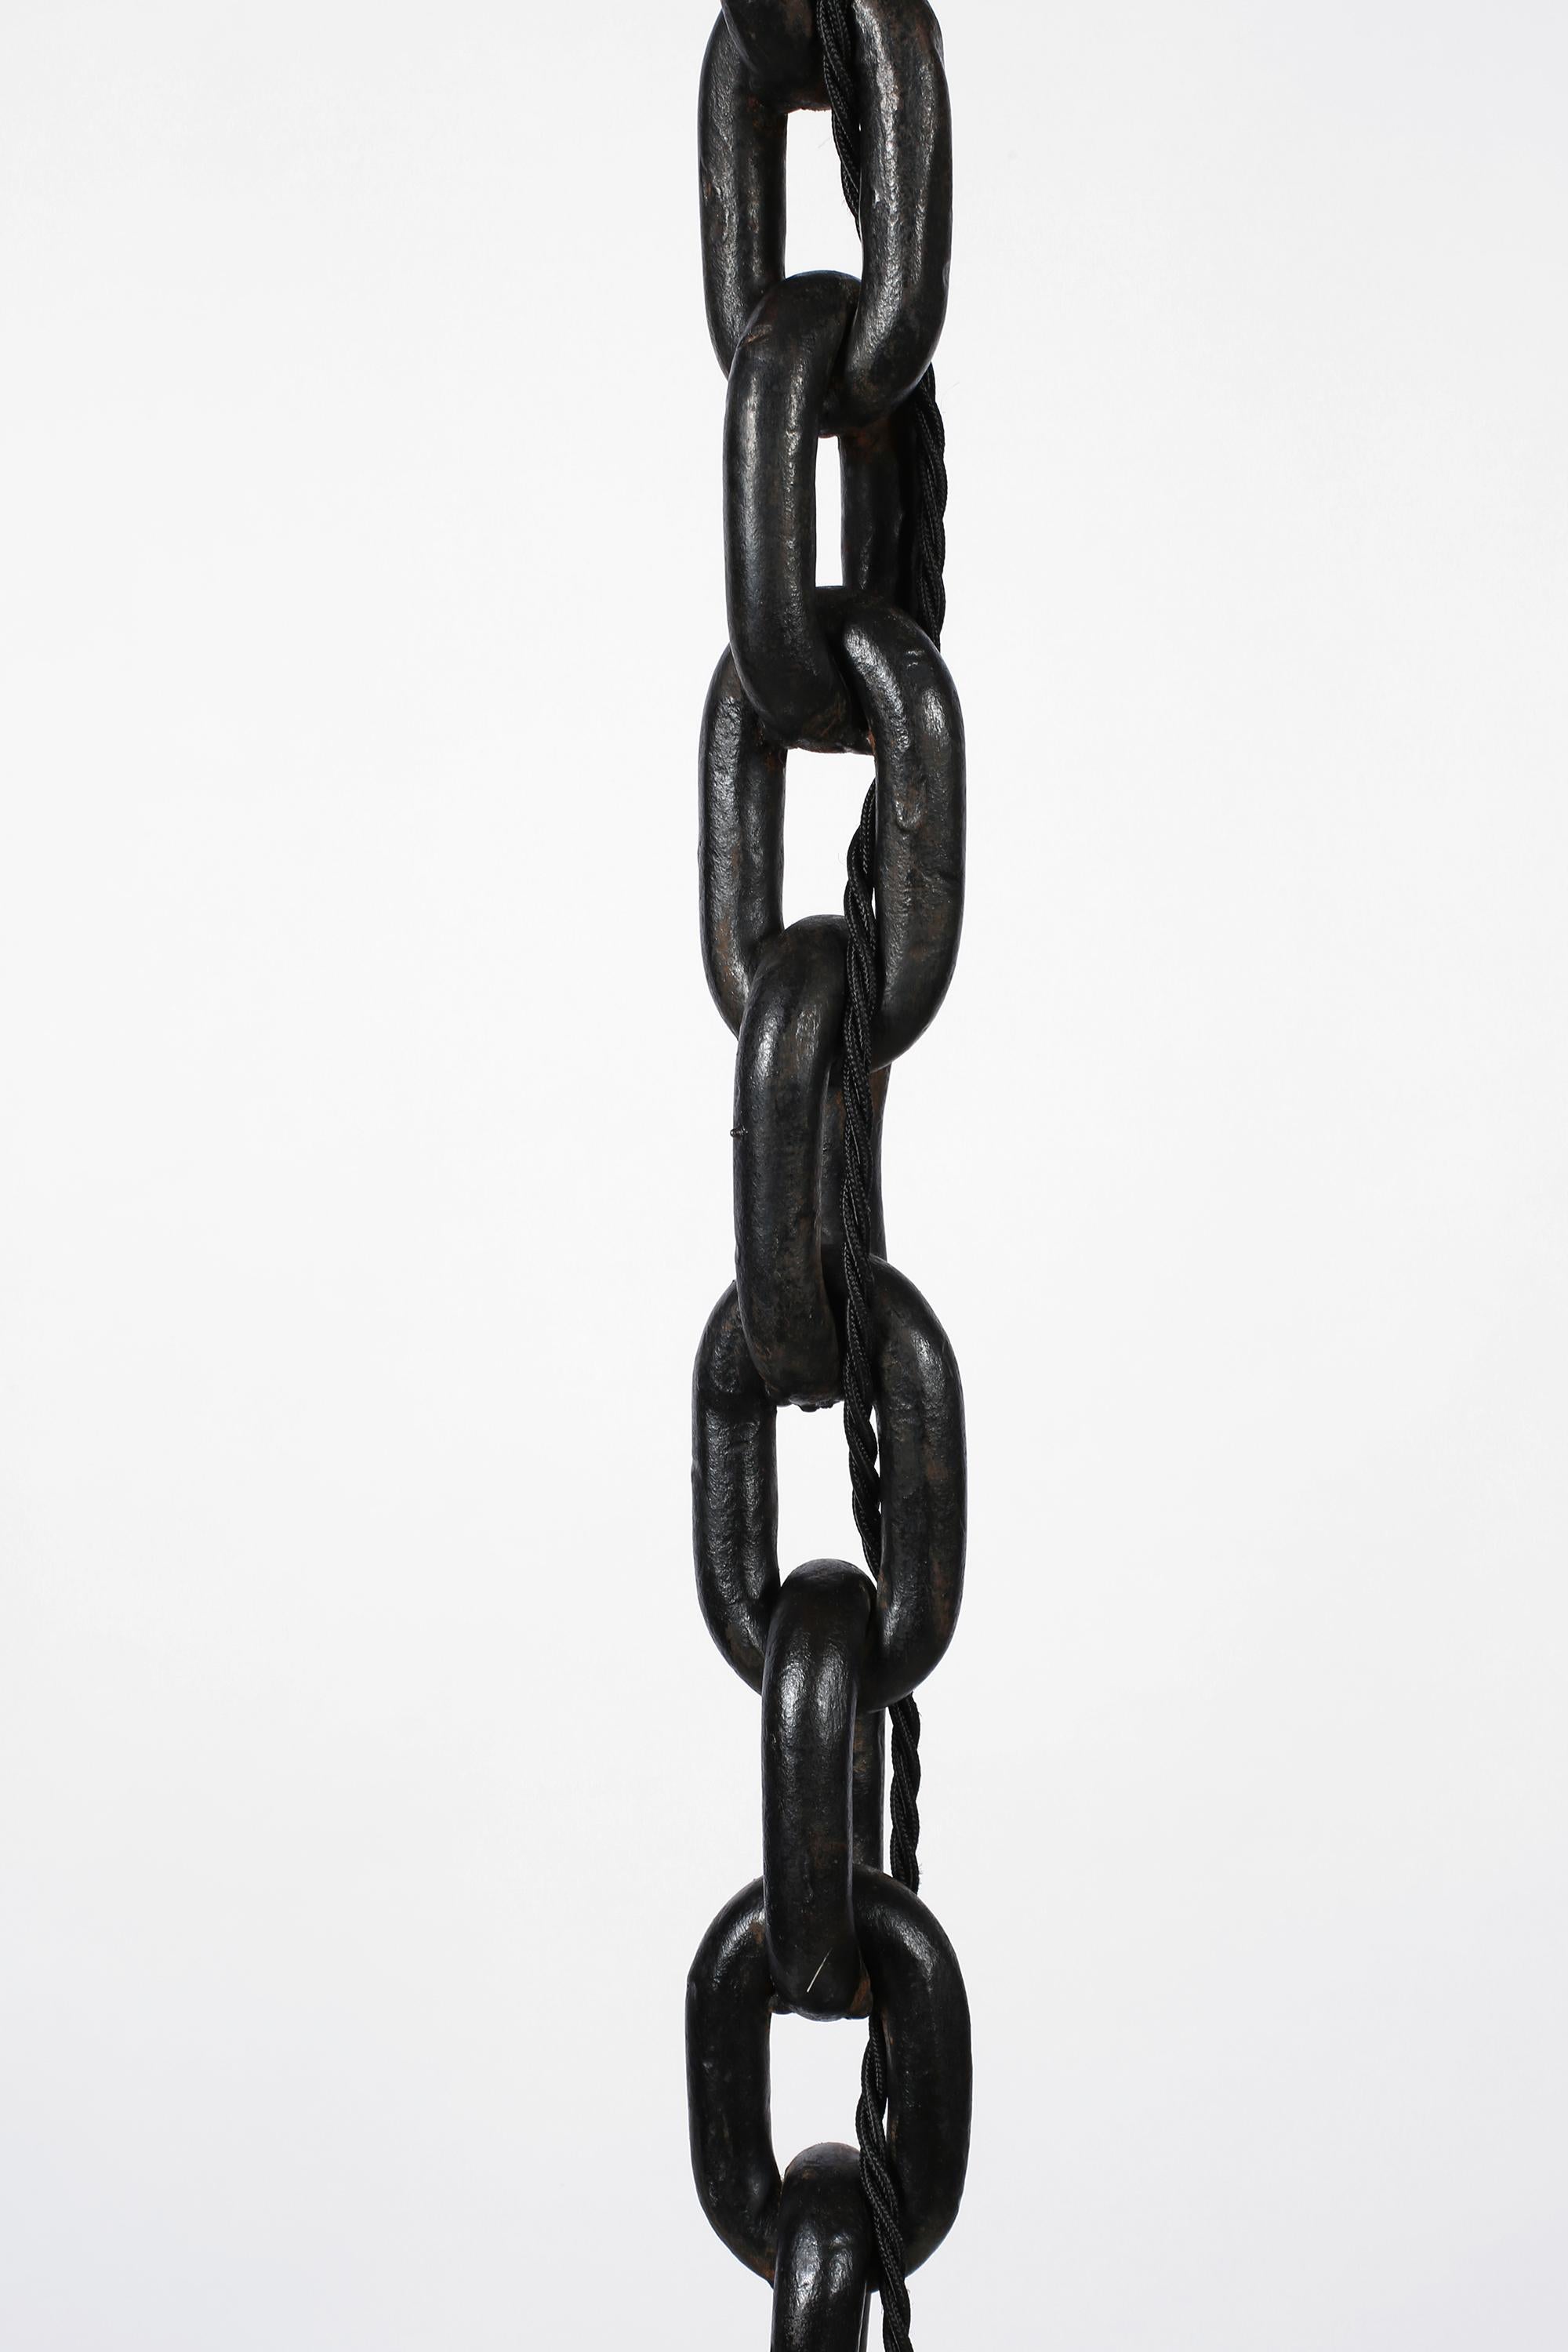 French Midcentury Brutalist Iron Chain Link Table Lamp In Good Condition For Sale In London, GB